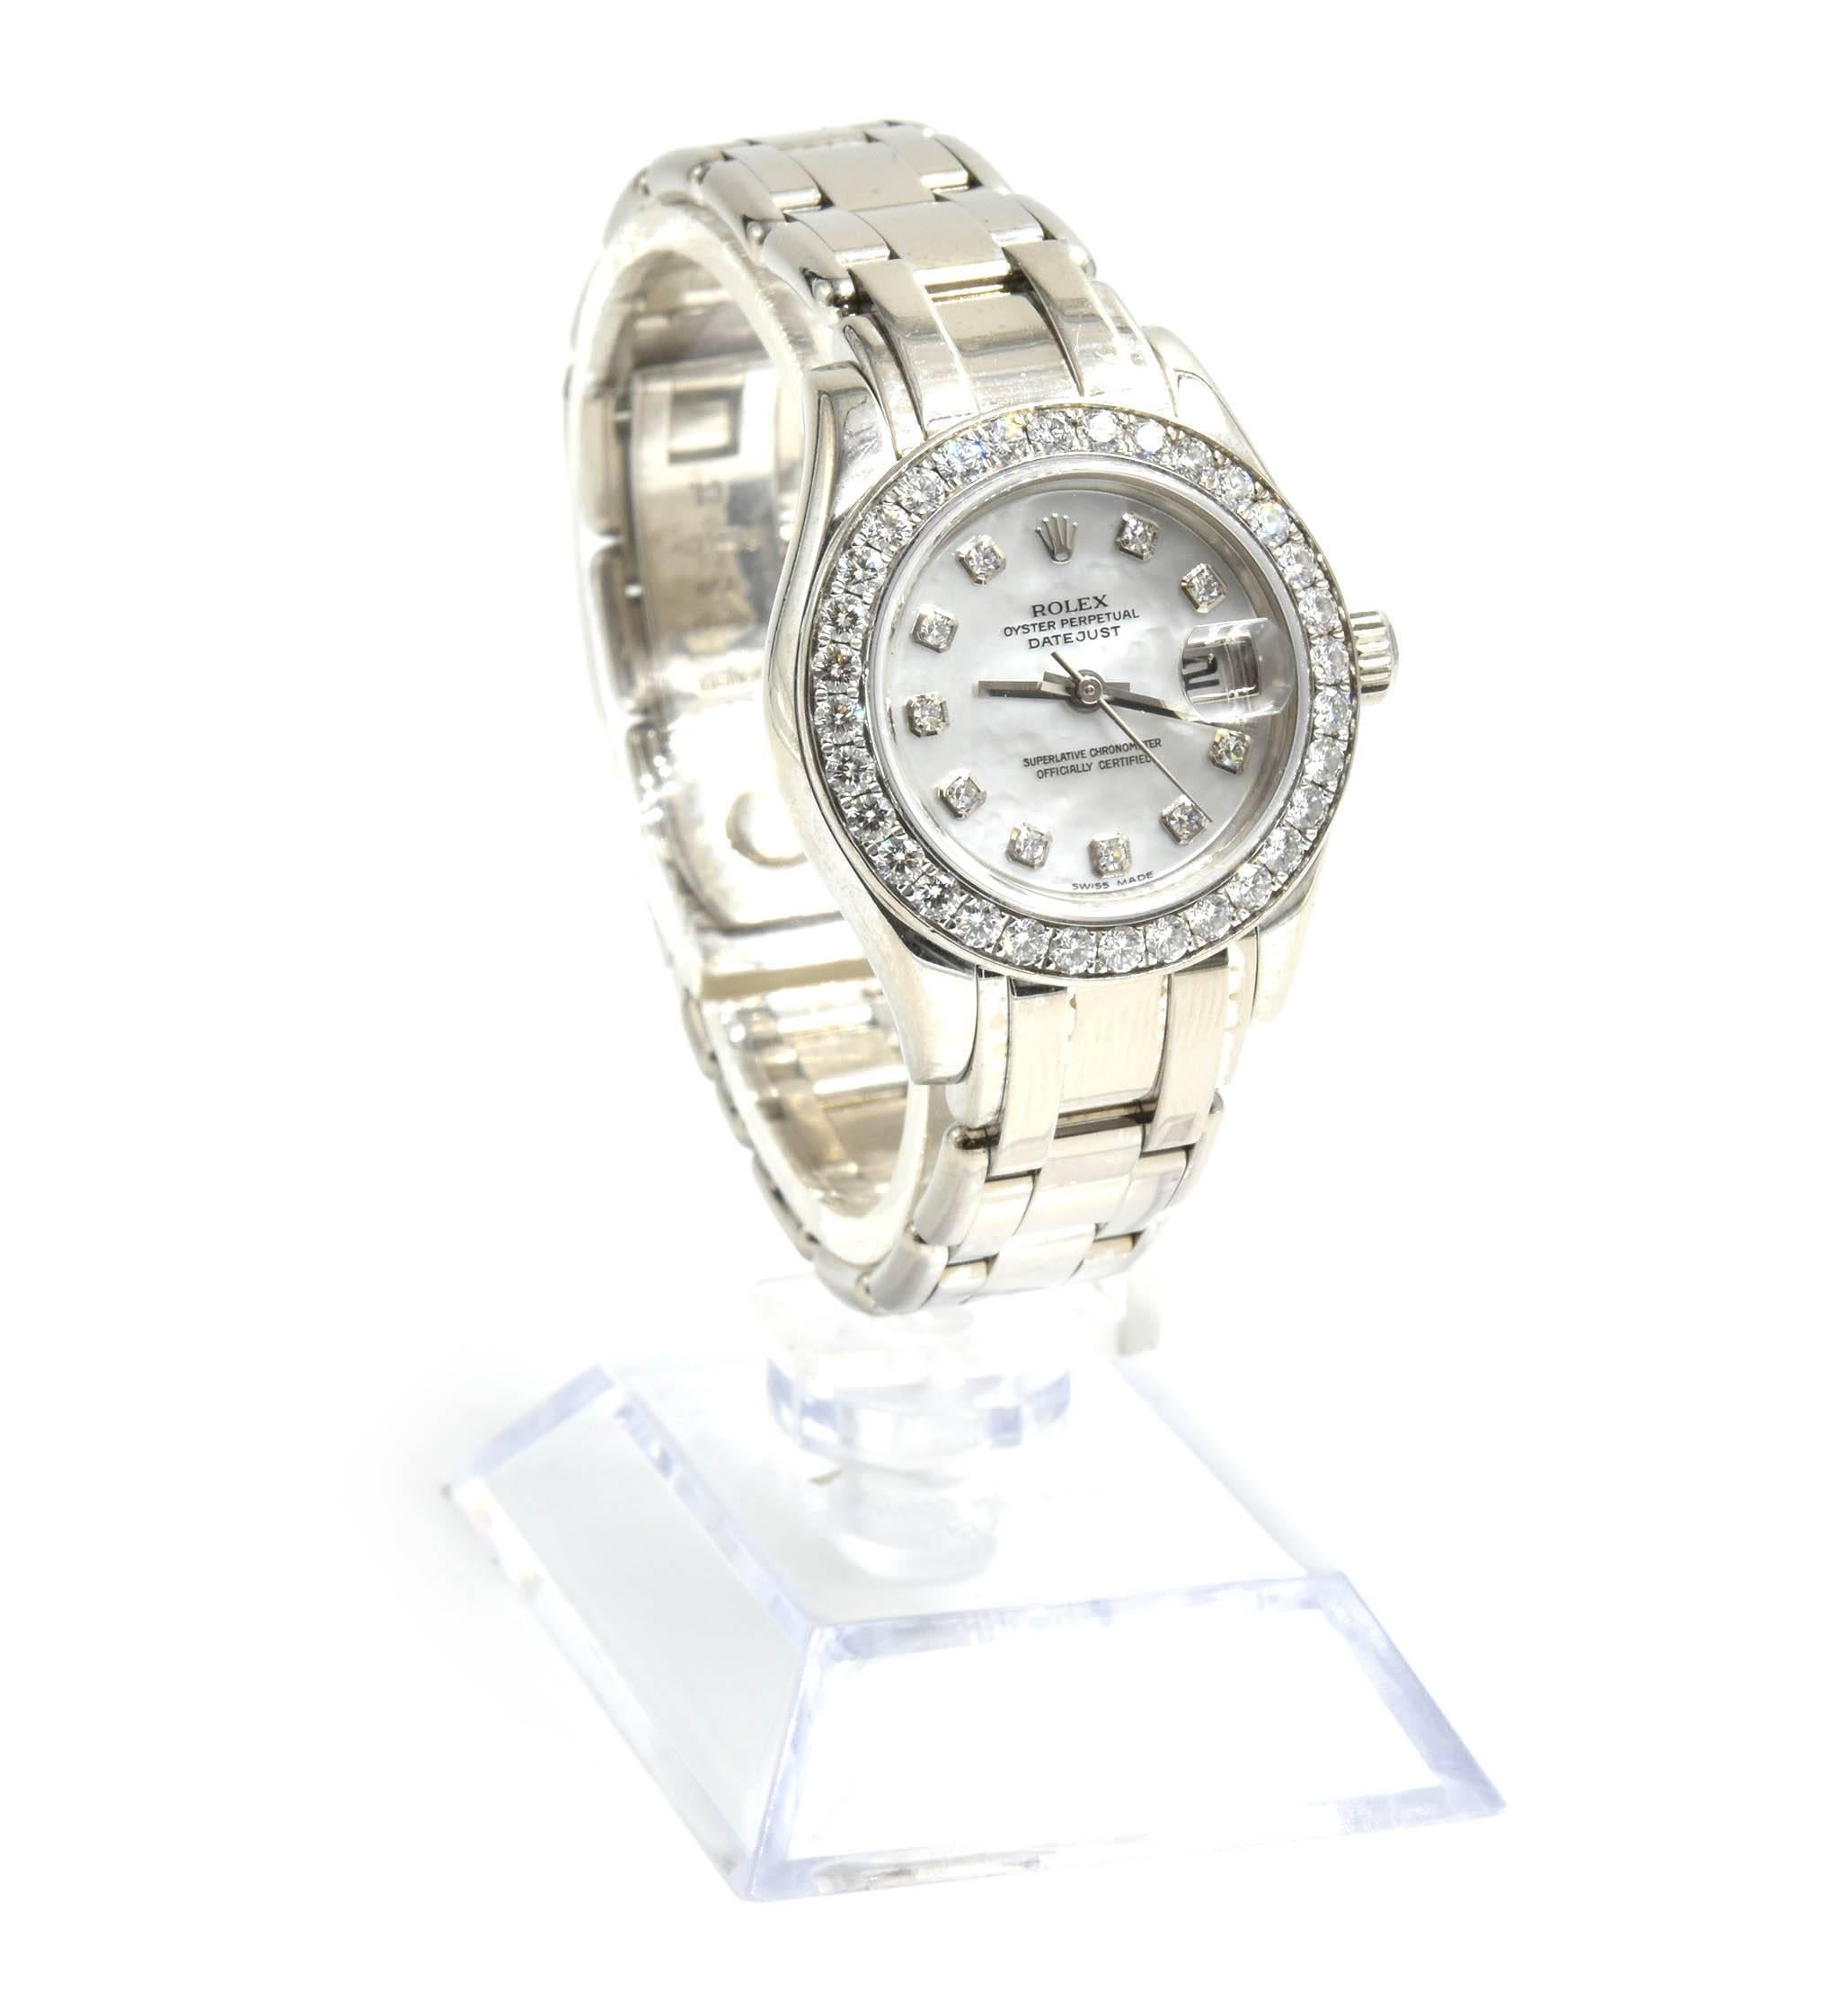 Movement: automatic
Function: hours, minutes, seconds, date
Case: 29mm 18k white gold case with white gold diamond set bezel, sapphire protective crystal, waterproof to 100 meters
Band: 18k white gold Pearlmaster rounded five-piece bracelet with